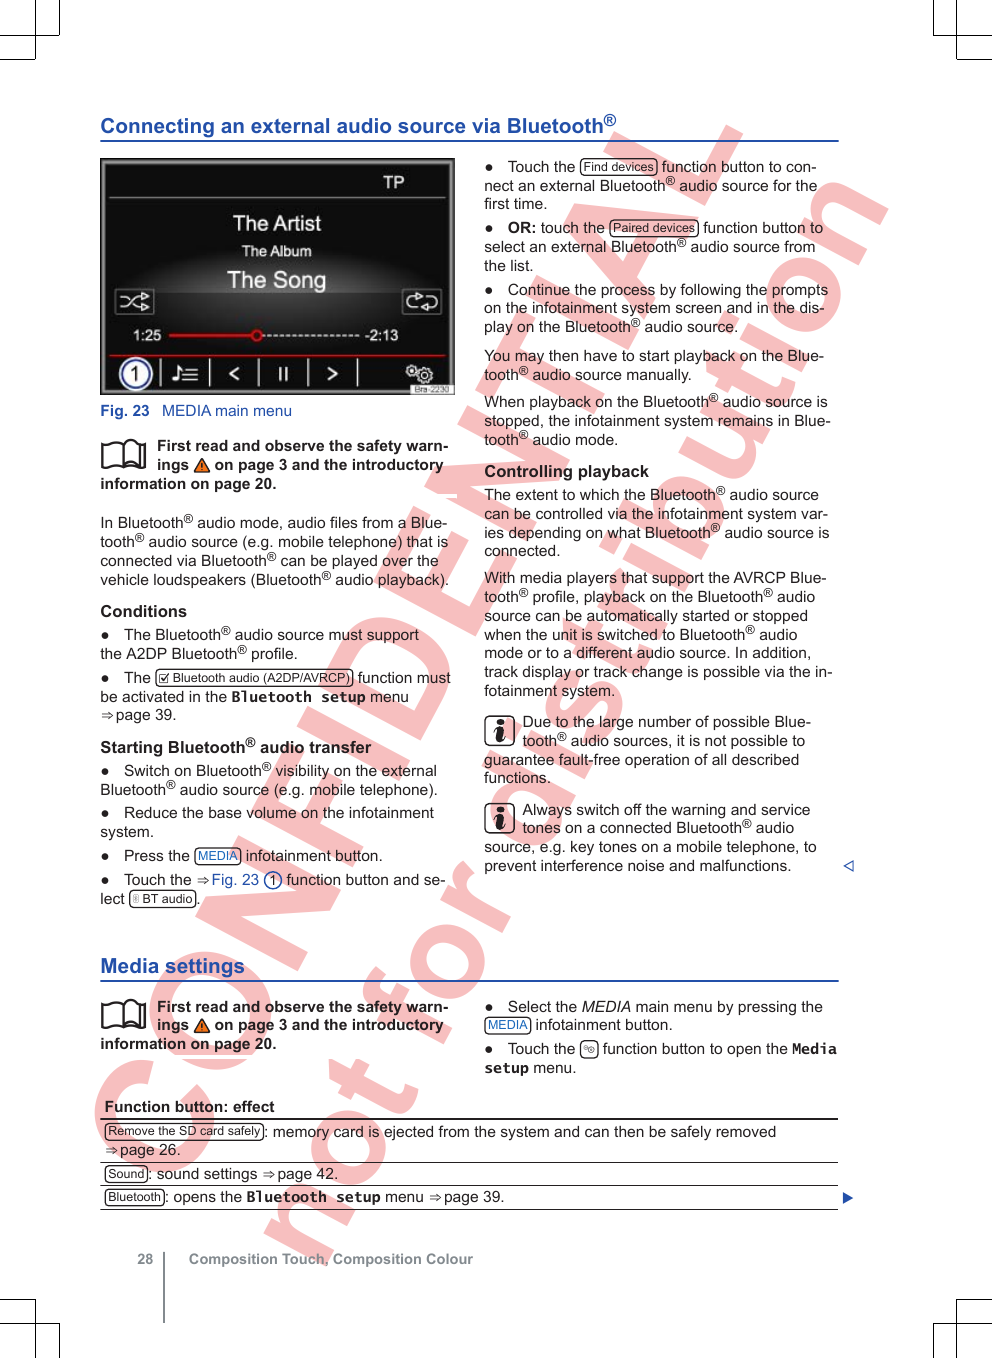  CONFIDENTIAL not for distribution Connecting an external audio source via Bluetooth®Fig. 23  MEDIA main menuFirst read and observe the safety warn-ings   on page 3 and the introductoryinformation on page 20.In Bluetooth® audio mode, audio files from a Blue-tooth® audio source (e.g. mobile telephone) that isconnected via Bluetooth® can be played over thevehicle loudspeakers (Bluetooth® audio playback).Conditions● The Bluetooth® audio source must supportthe A2DP Bluetooth® profile.● The   Bluetooth audio (A2DP/AVRCP)  function mustbe activated in the Bluetooth setup menu⇒ page 39.Starting Bluetooth® audio transfer●Switch on Bluetooth® visibility on the externalBluetooth® audio source (e.g. mobile telephone).● Reduce the base volume on the infotainmentsystem.● Press the  MEDIA  infotainment button.● Touch the ⇒ Fig. 23  1 function button and se-lect   BT audio .● Touch the  Find devices  function button to con-nect an external Bluetooth® audio source for thefirst time.●OR: touch the  Paired devices  function button toselect an external Bluetooth® audio source fromthe list.● Continue the process by following the promptson the infotainment system screen and in the dis-play on the Bluetooth® audio source.You may then have to start playback on the Blue-tooth® audio source manually.When playback on the Bluetooth® audio source isstopped, the infotainment system remains in Blue-tooth® audio mode.Controlling playbackThe extent to which the Bluetooth® audio sourcecan be controlled via the infotainment system var-ies depending on what Bluetooth® audio source isconnected.With media players that support the AVRCP Blue-tooth® profile, playback on the Bluetooth® audiosource can be automatically started or stoppedwhen the unit is switched to Bluetooth® audiomode or to a different audio source. In addition,track display or track change is possible via the in-fotainment system.Due to the large number of possible Blue-tooth® audio sources, it is not possible toguarantee fault-free operation of all describedfunctions.Always switch off the warning and servicetones on a connected Bluetooth® audiosource, e.g. key tones on a mobile telephone, toprevent interference noise and malfunctions. Media settingsFirst read and observe the safety warn-ings   on page 3 and the introductoryinformation on page 20.● Select the MEDIA main menu by pressing theMEDIA  infotainment button.● Touch the   function button to open the Mediasetup menu.Function button: effectRemove the SD card safely : memory card is ejected from the system and can then be safely removed⇒ page 26.Sound : sound settings ⇒ page 42.Bluetooth : opens the Bluetooth setup menu ⇒ page 39. Composition Touch, Composition Colour28